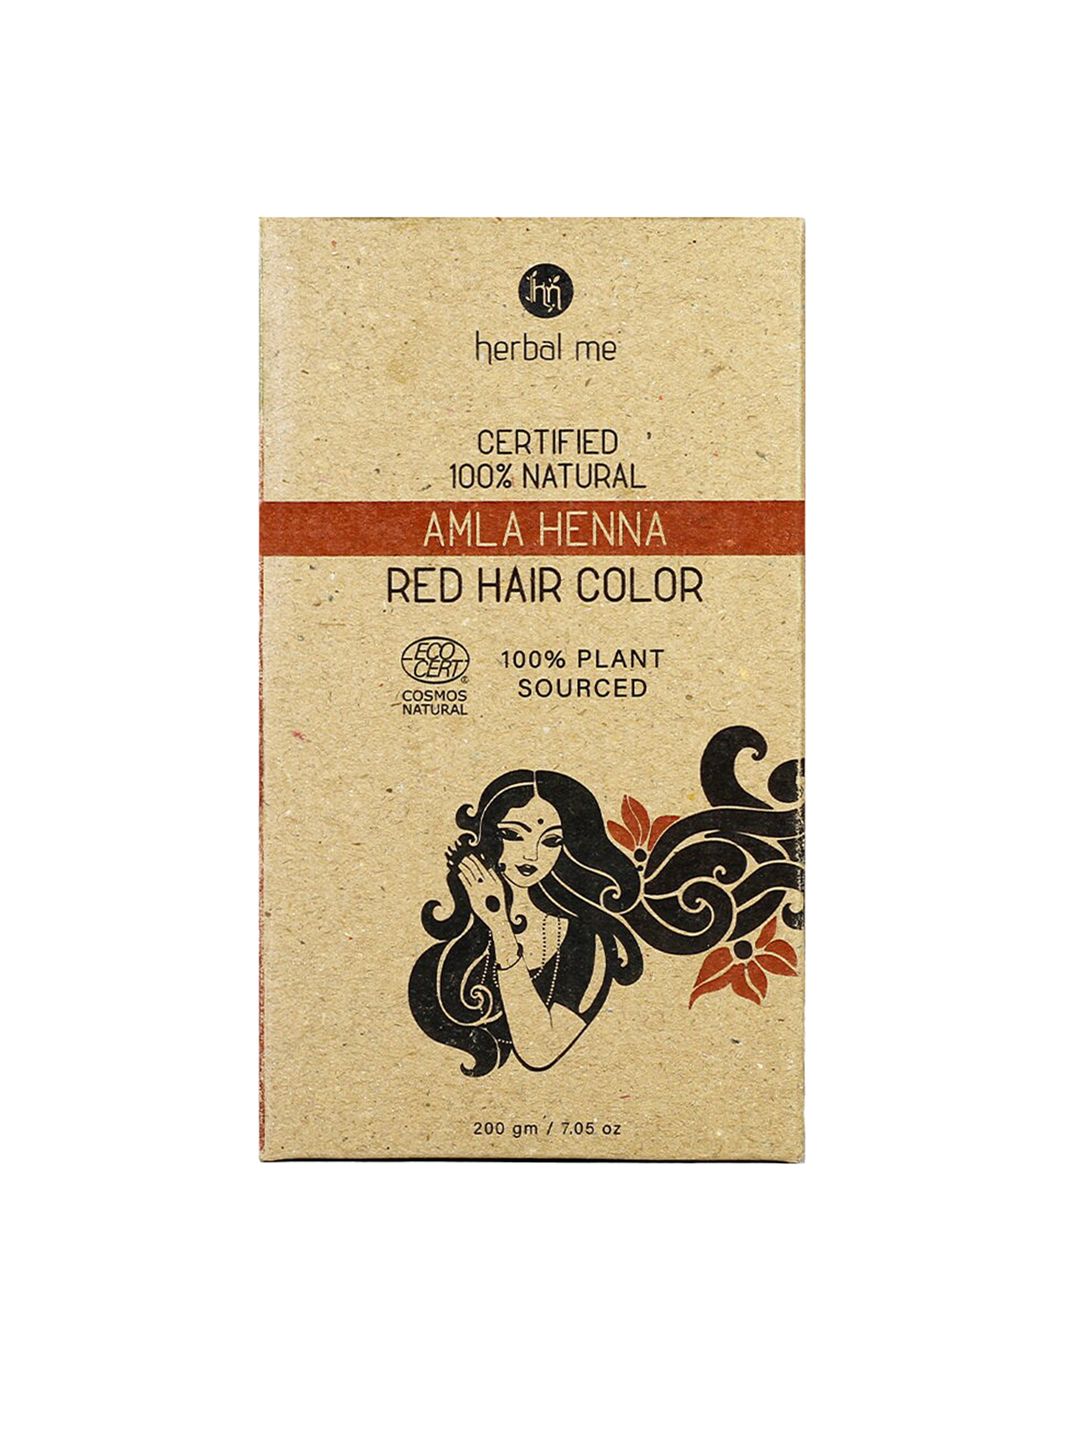 HERBAL ME Certified 100% Natural Amla Heena Hair Colour 200 g - Red Price in India